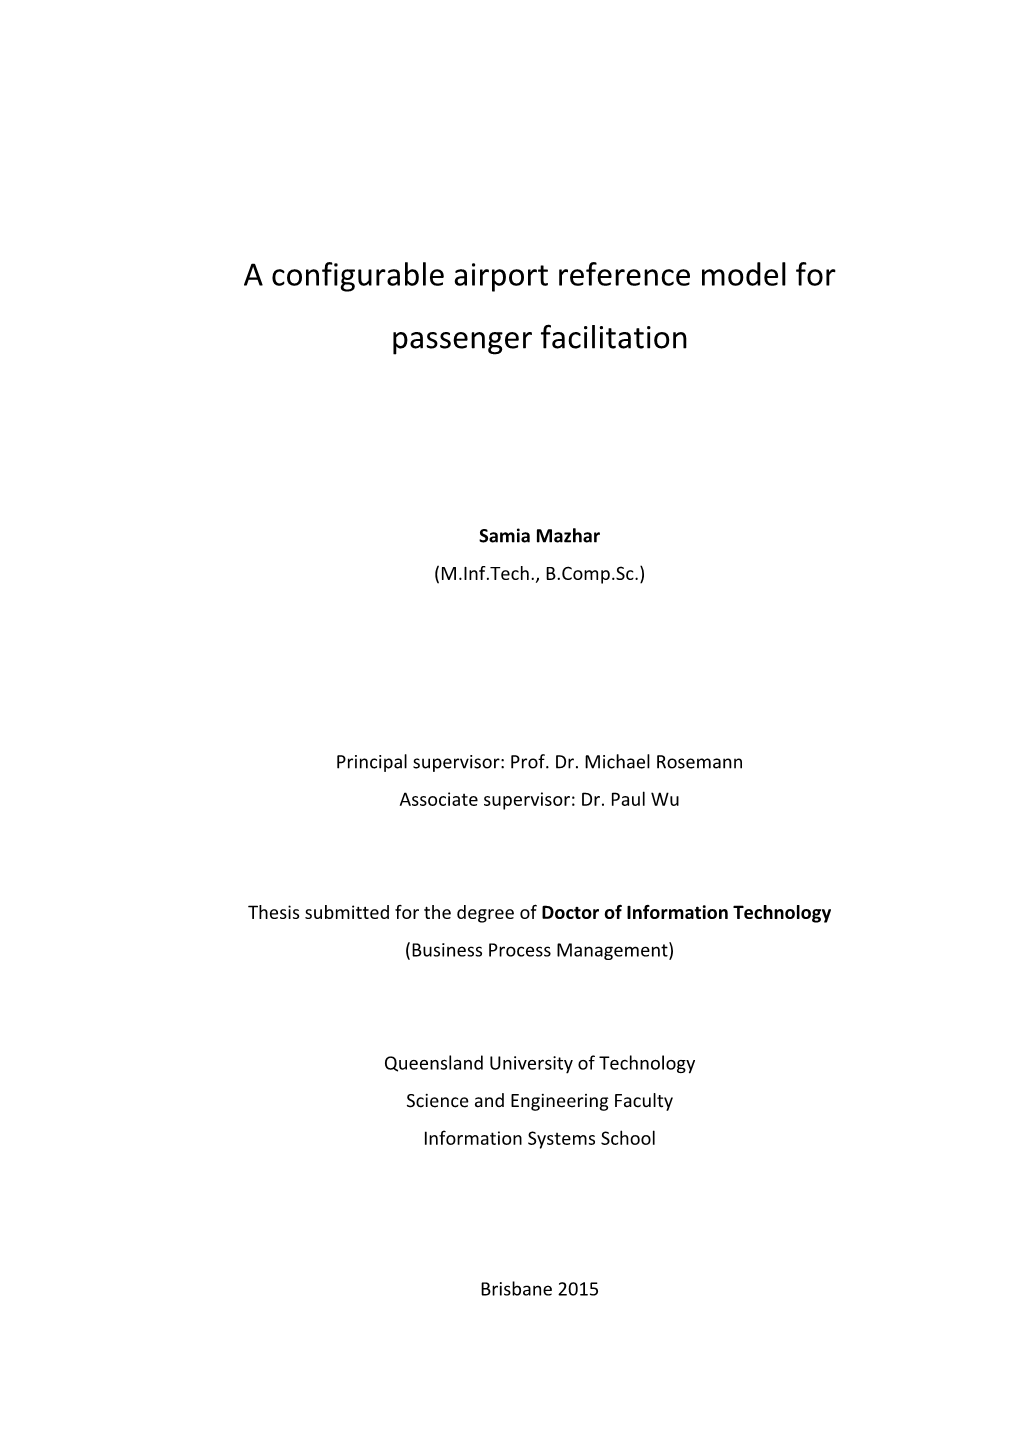 A Configurable Airport Reference Model for Passenger Facilitation